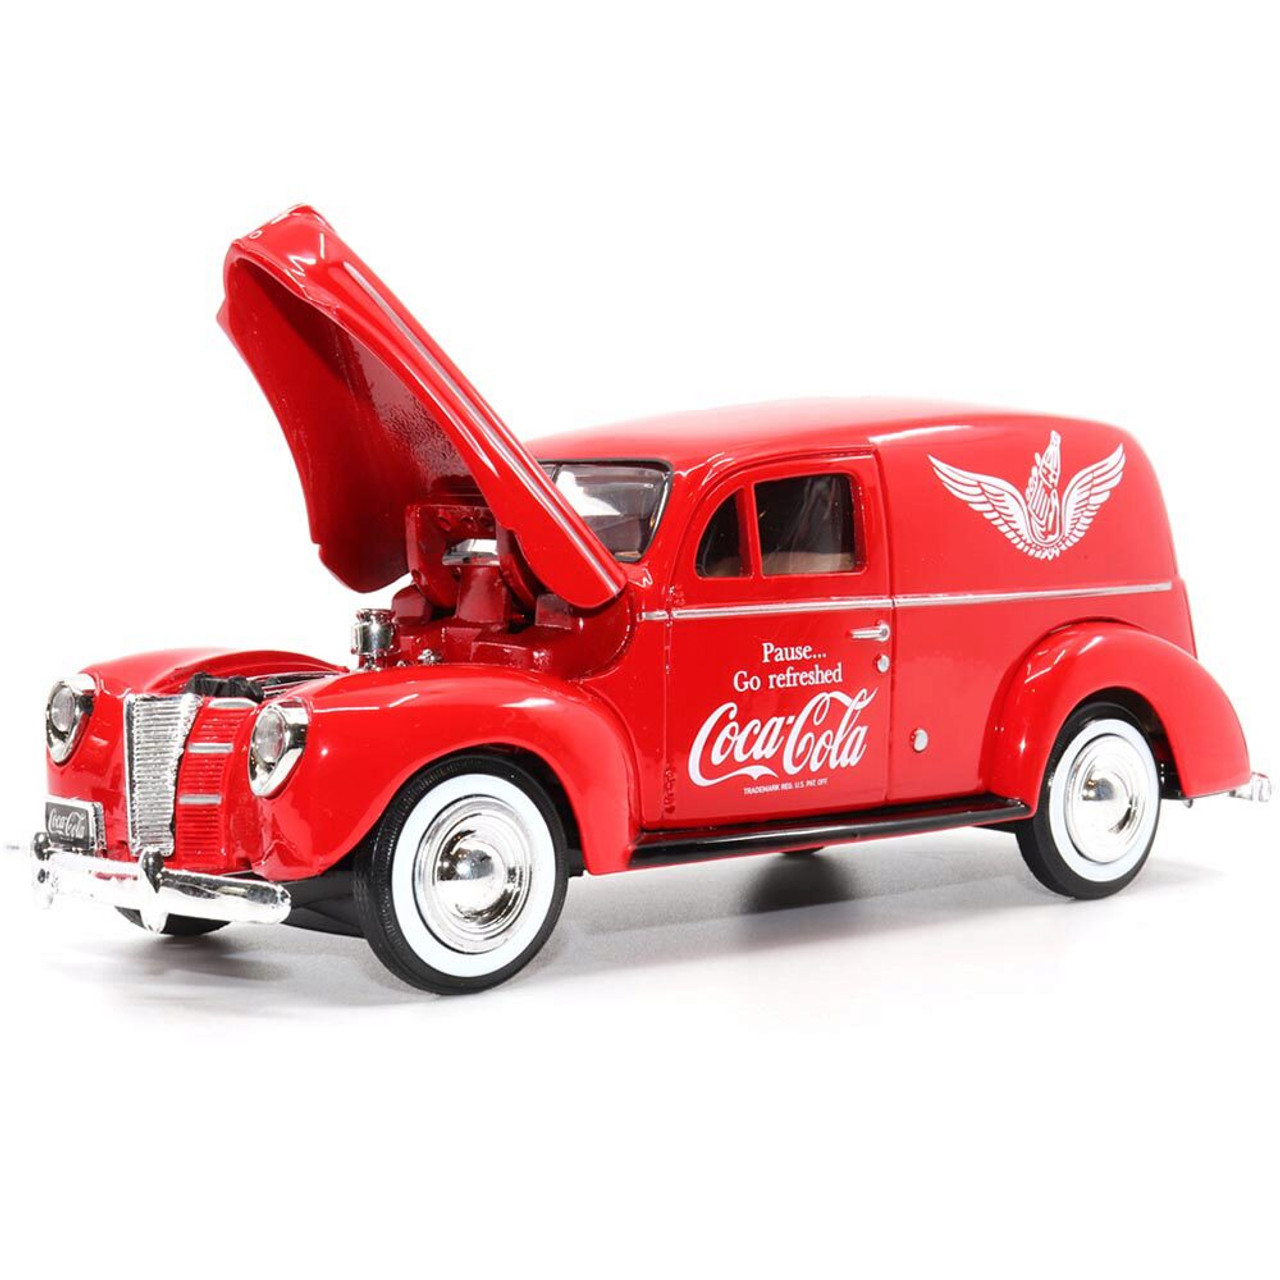 1940 Coca Cola Ford Delivery Van w/ Cooler 1:24 Scale Diecast Model Truck  by Motor City Classics